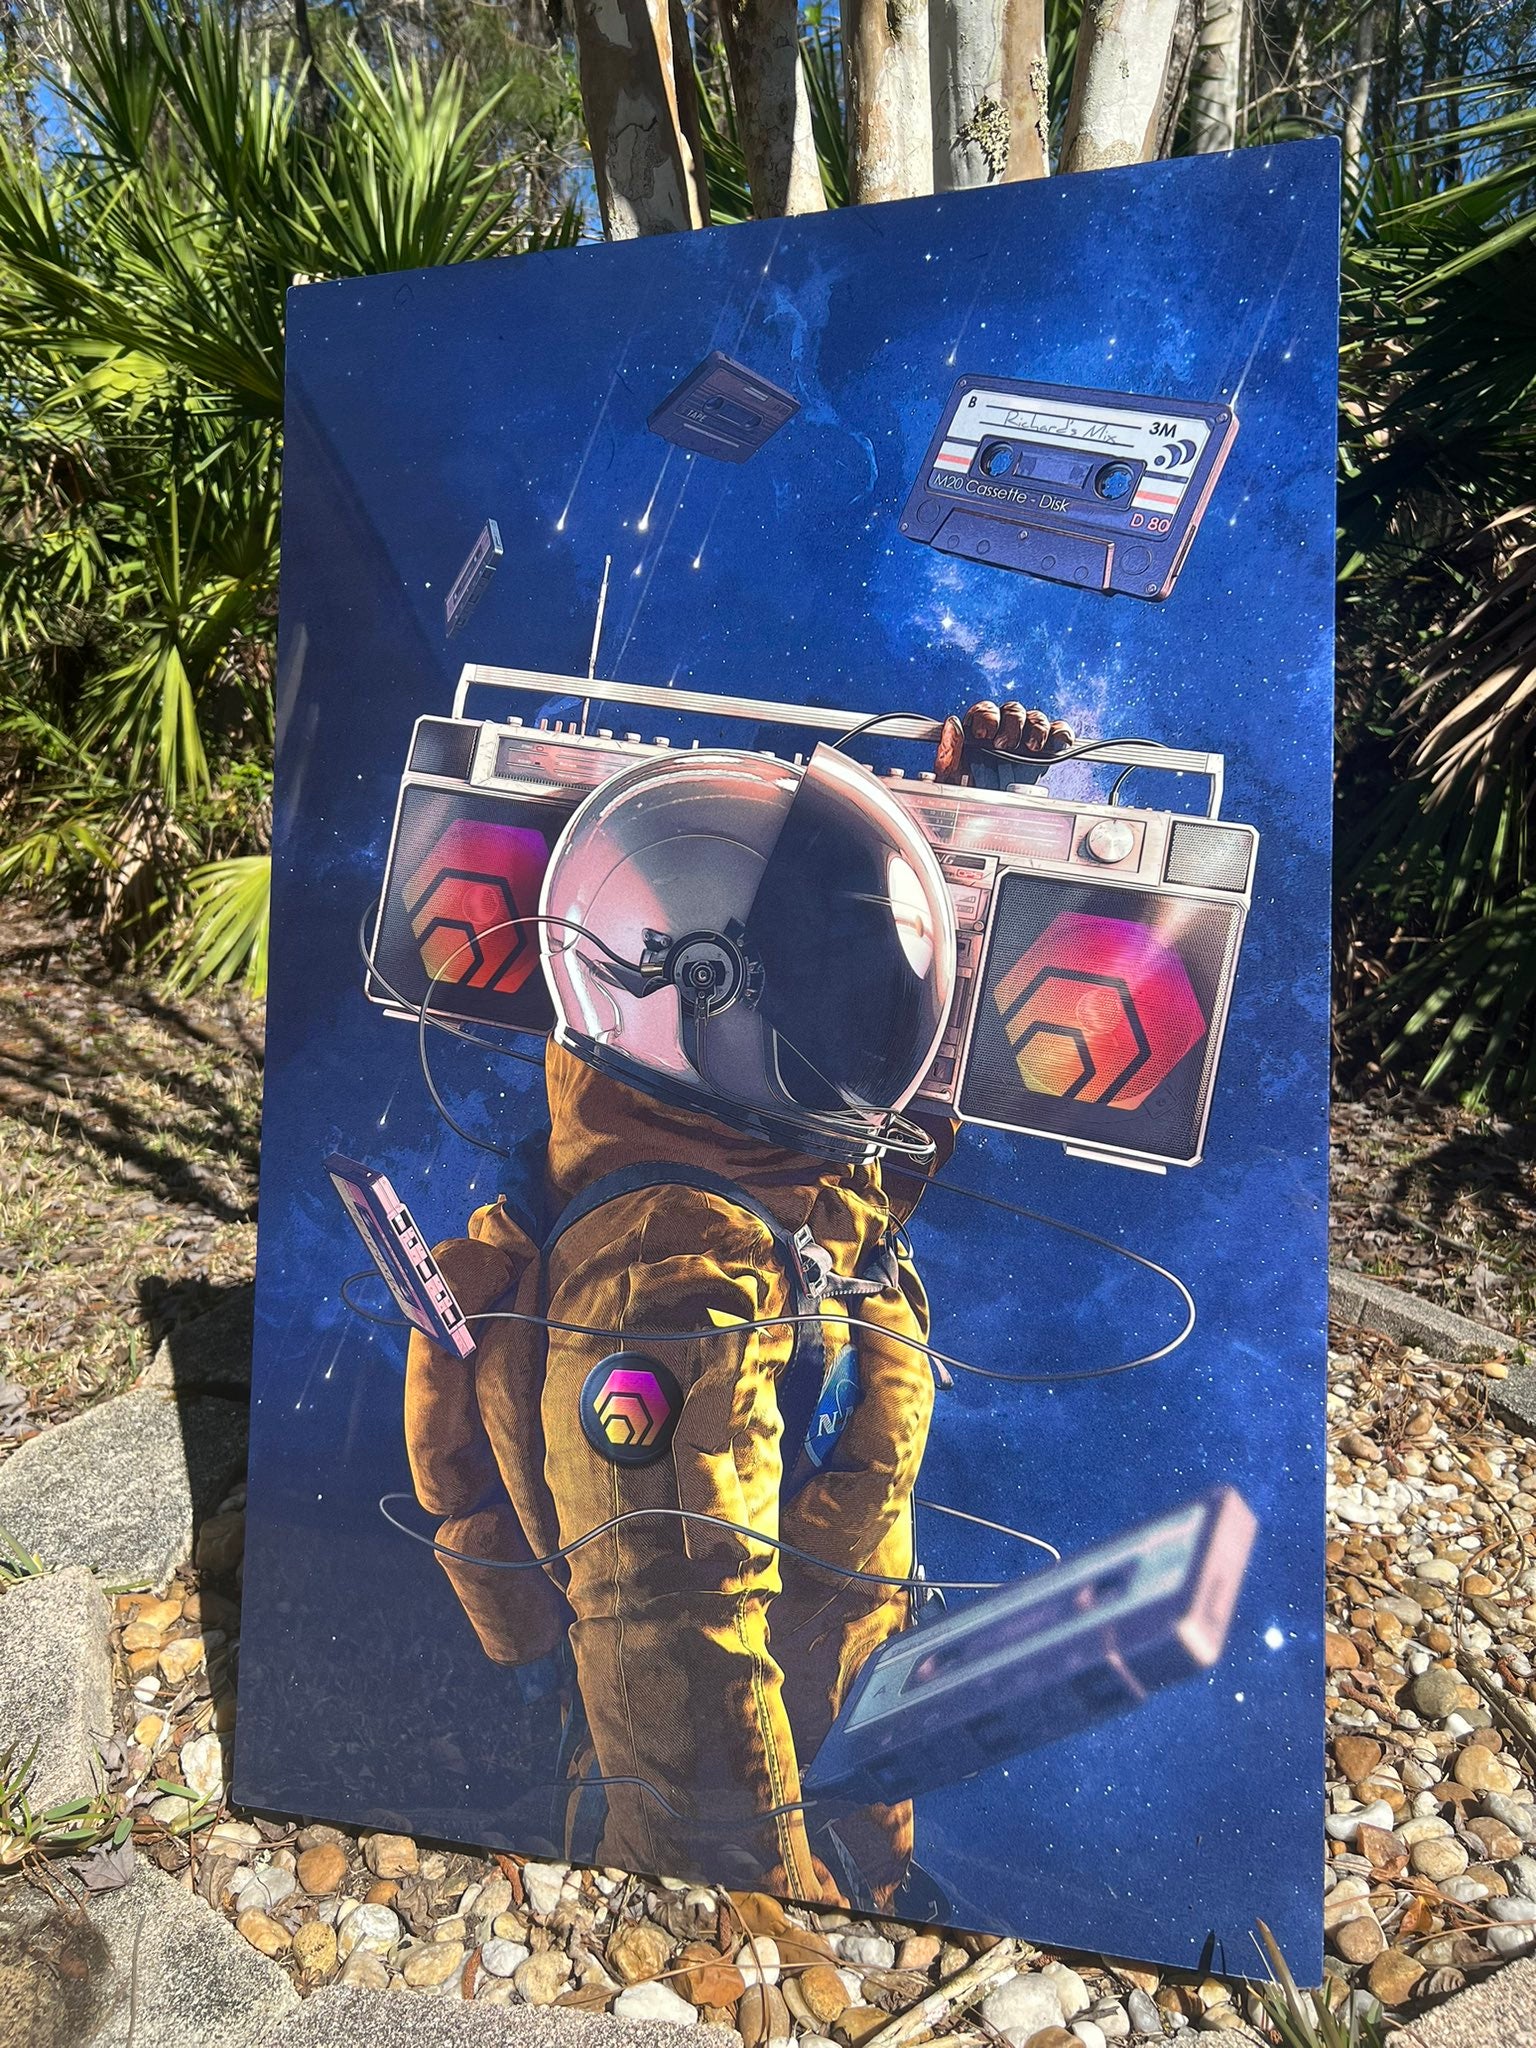 'Major Rich' - HEX Astronaut Metal Panel - Limited to 50